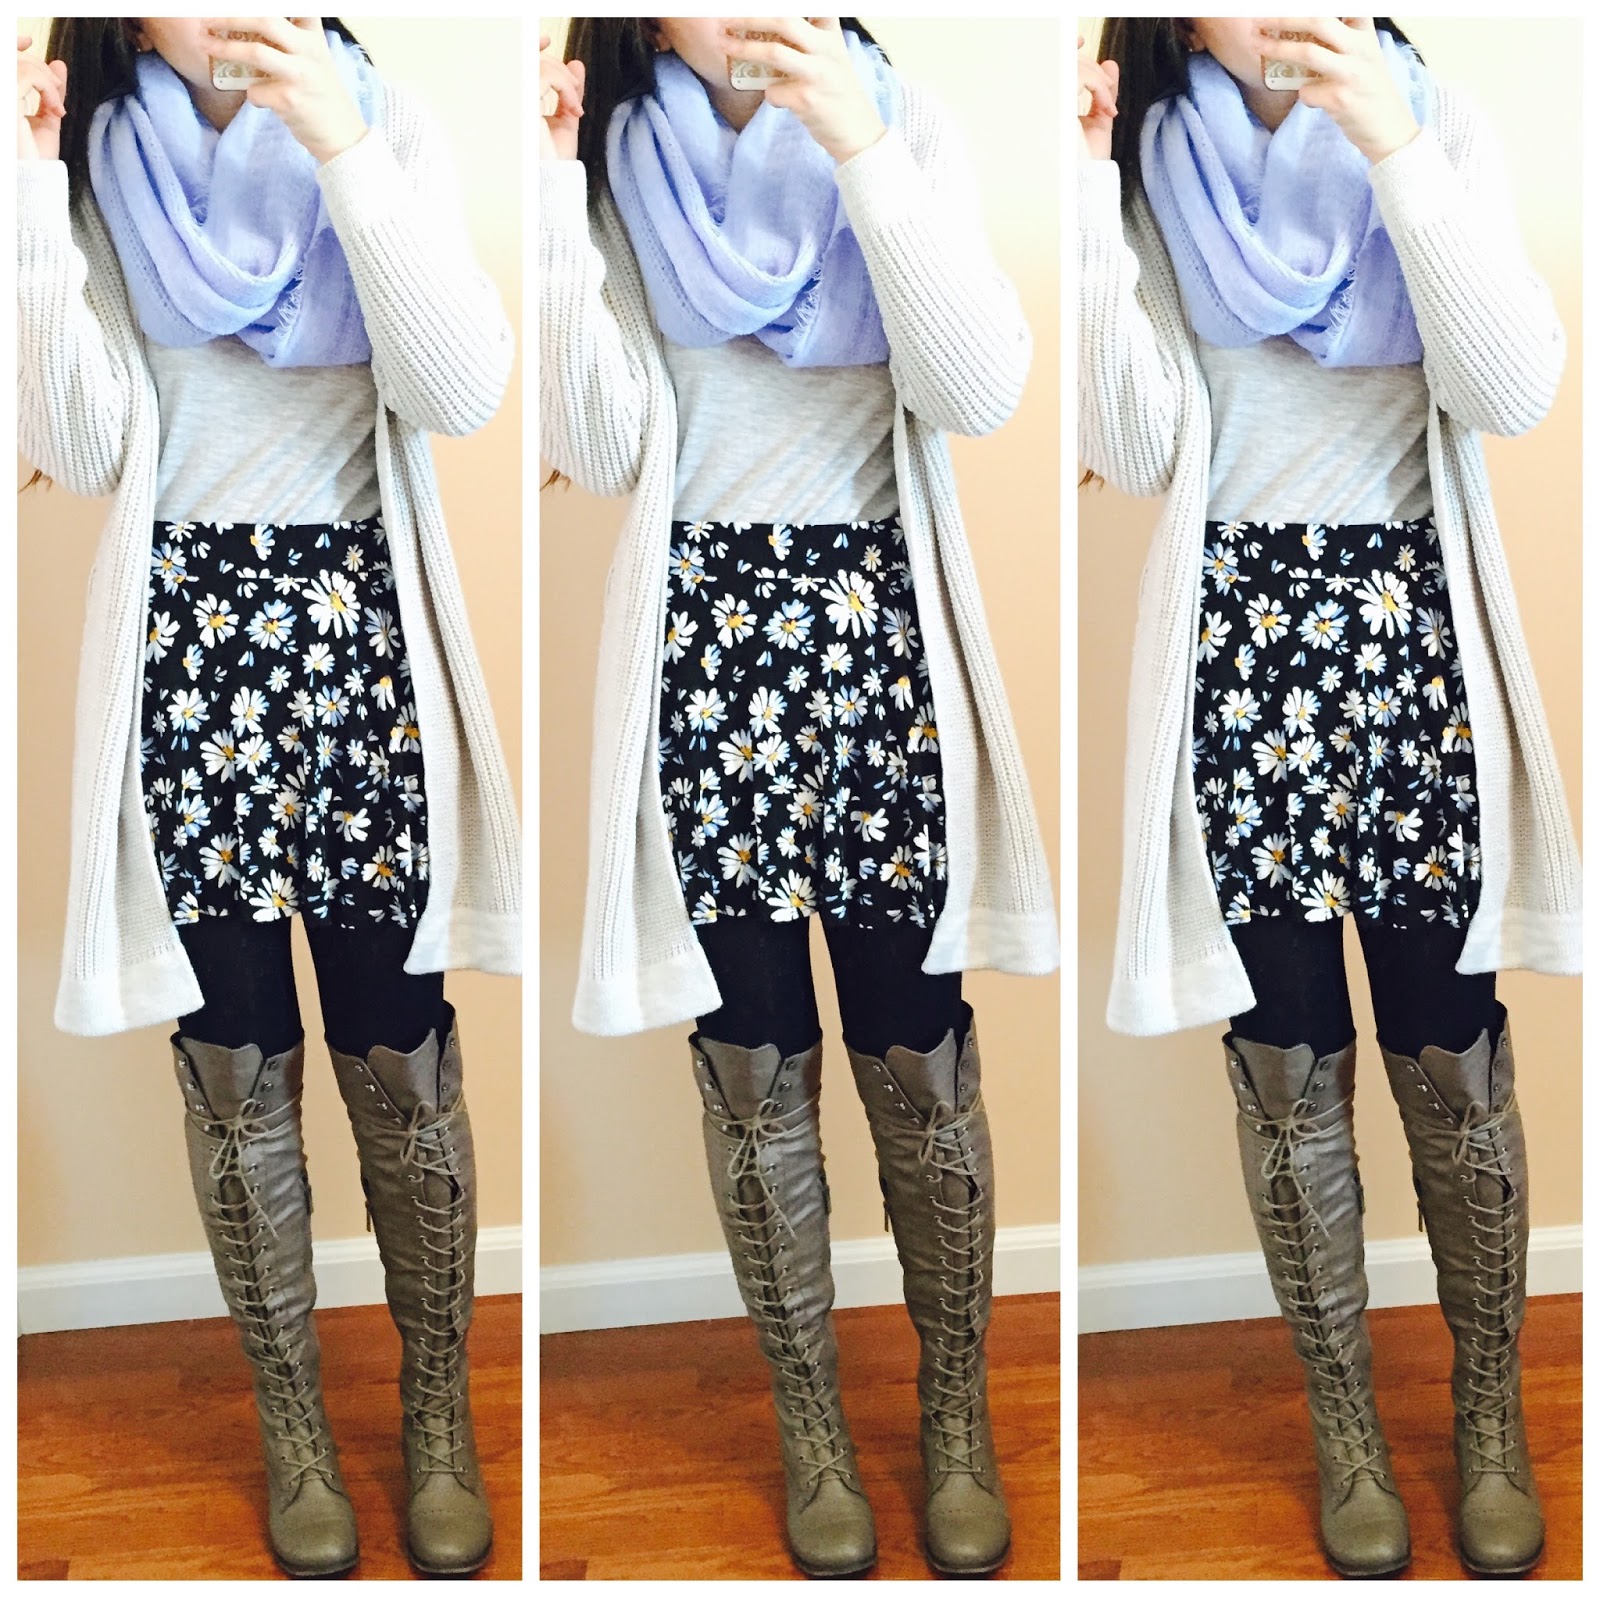 Love, Iris: How to Style Over the Knee Boots 20 ways Featuring AMIclubwear